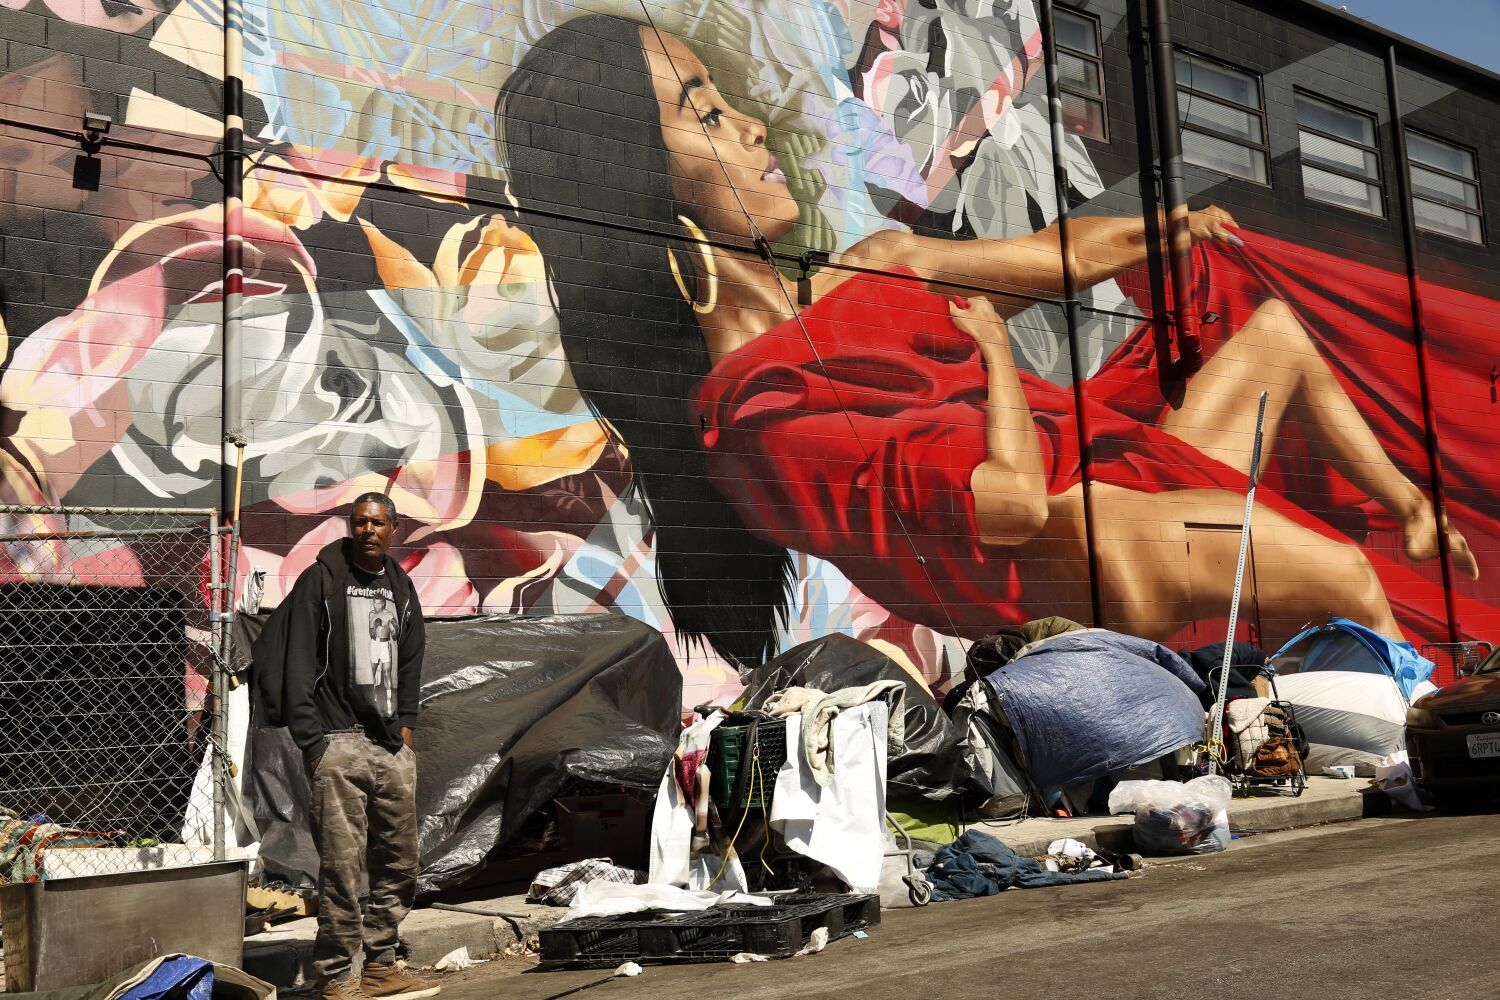 $60-million state grant to aid L.A. County in expanding homeless services in Skid Row